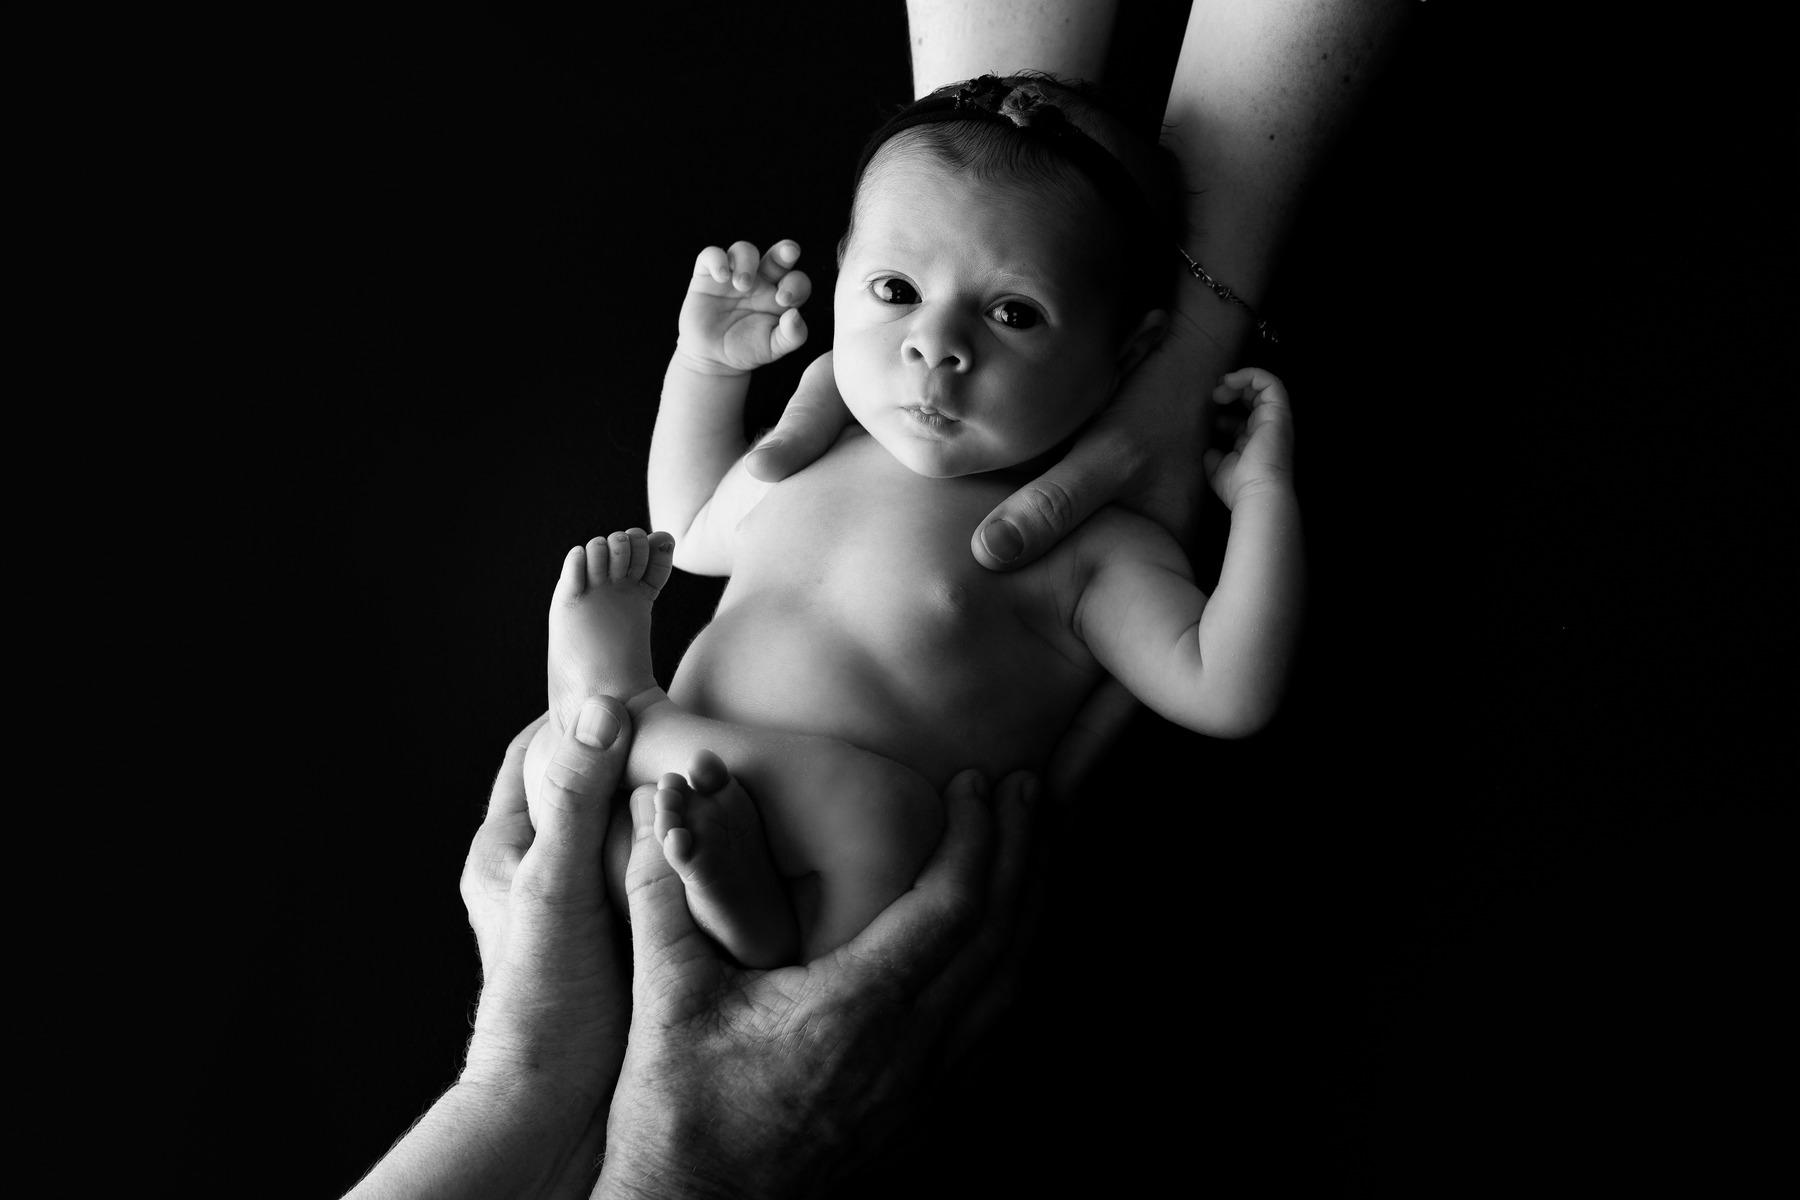 "Baby girl in black and white with parents' hands gently cradling her, captured by Céire Rhein, Dublin's newborn photographer."